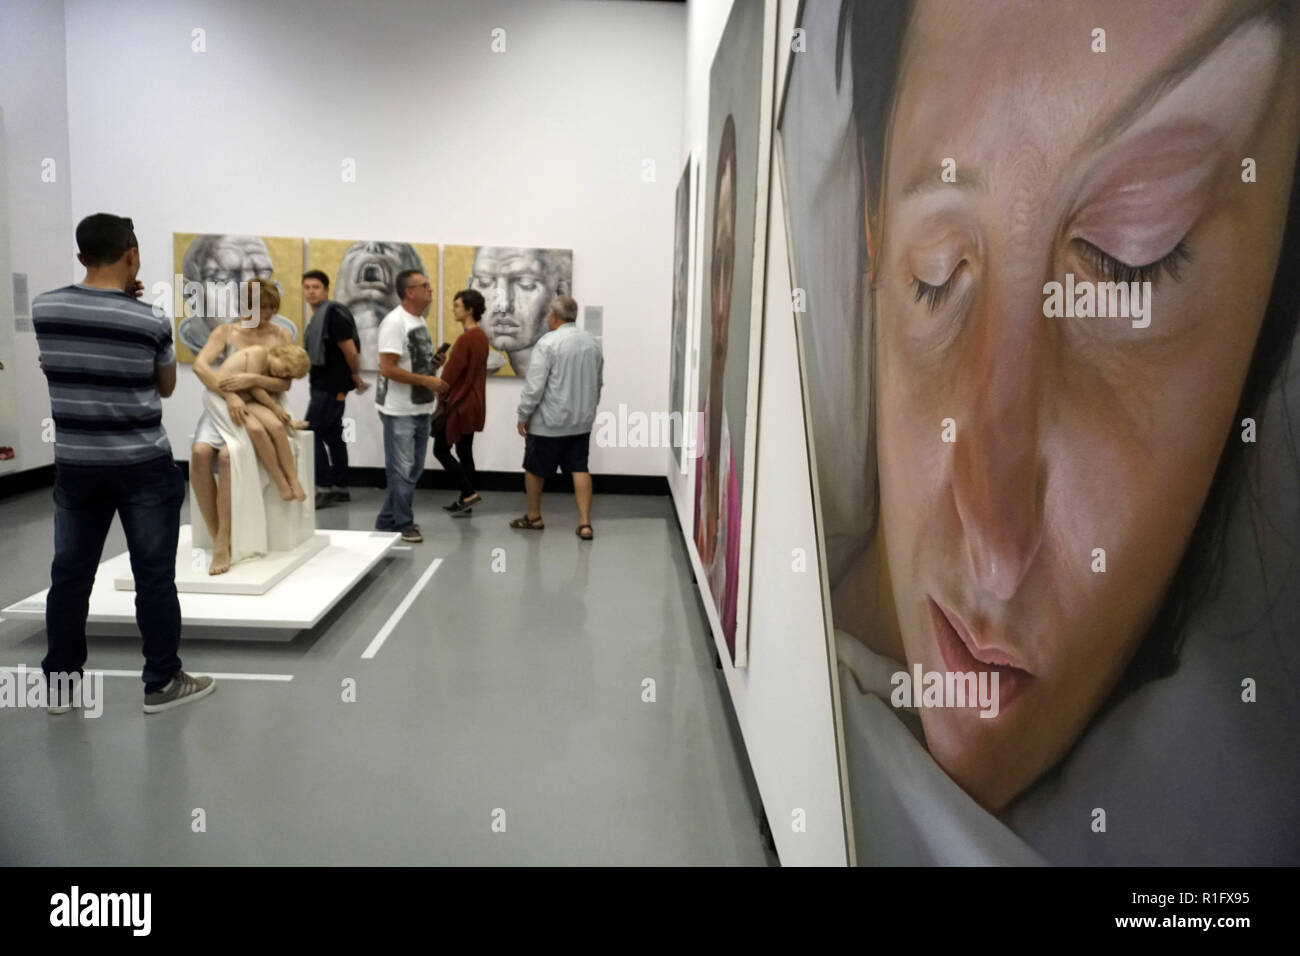 November 12, 2018 - SÃ£O Paulo, SÃ£o Paulo, Brazil - SÃ£o Paulo (SP), 12/11/2018 - 50 YEARS OF REALISM IN SP - Bamco Cultural Center of Brazil in SÃ£o Paulo shows shows with realistic works. The exhibition ''50 Years of Realism - From Photorealism to Virtual Reality'' has about 100 pieces of 30 Brazilian and foreign artists, and is in print until January 2019. Credit: Cris Faga/ZUMA Wire/Alamy Live News Stock Photo